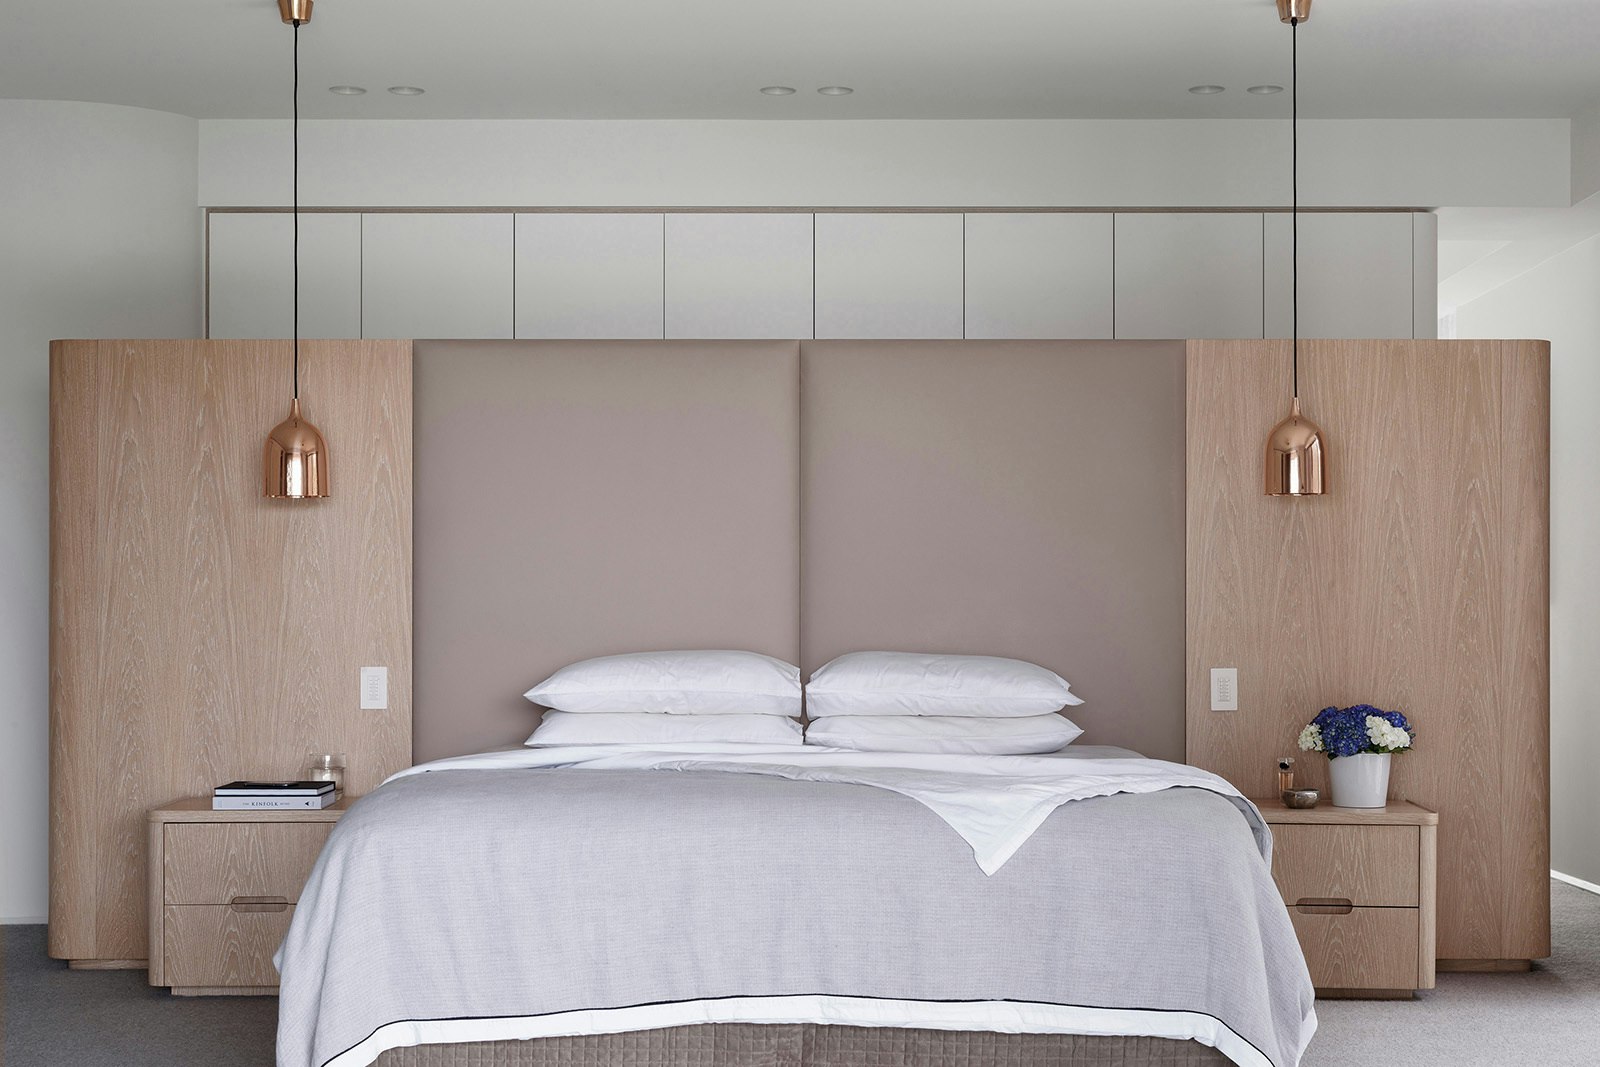 Light bedroom design with unexpected vault mirror ceiling and